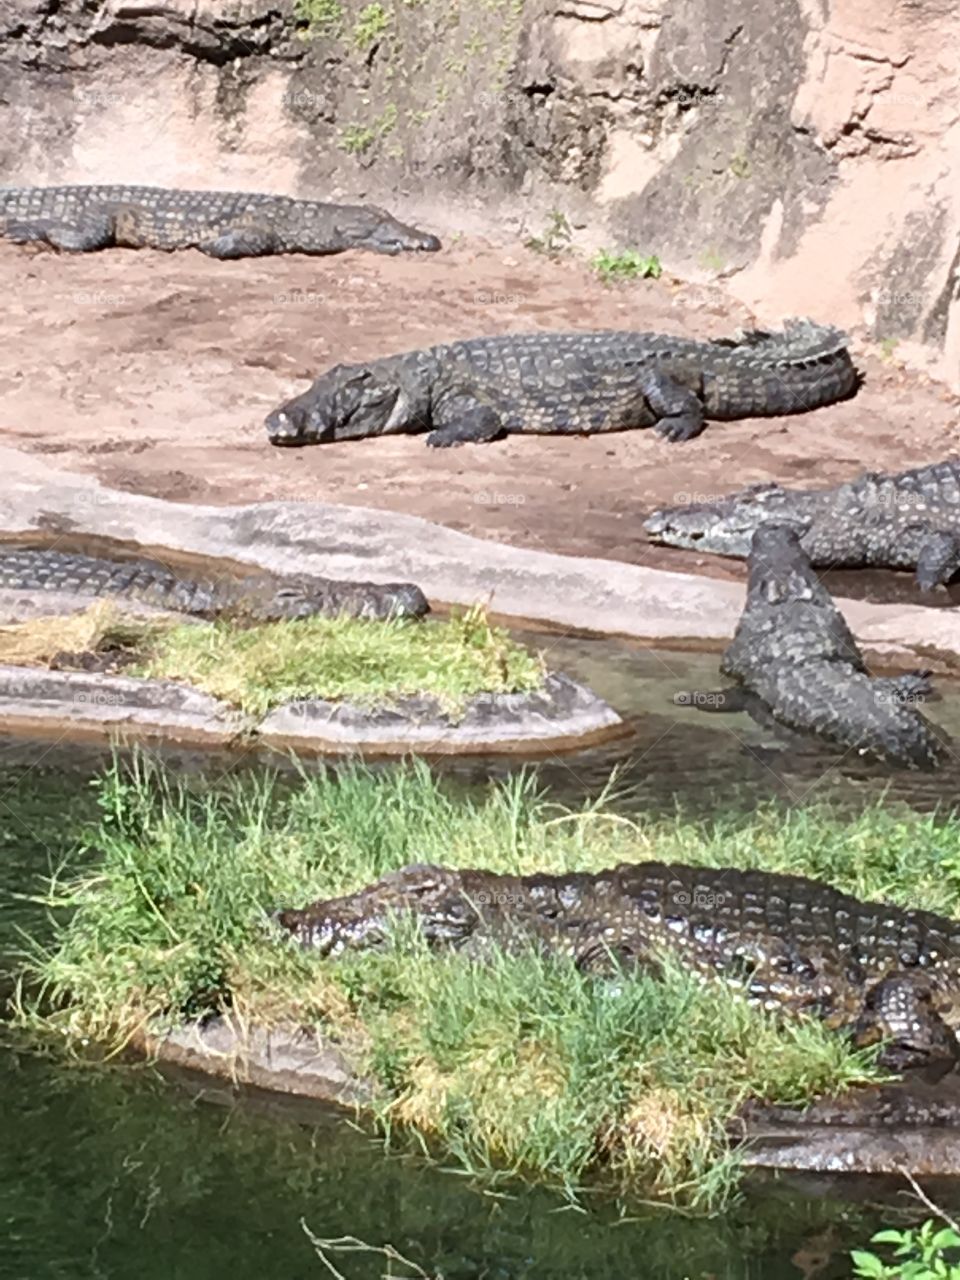 This large grouping of crocodiles are enjoying the sun of a warm summer day.